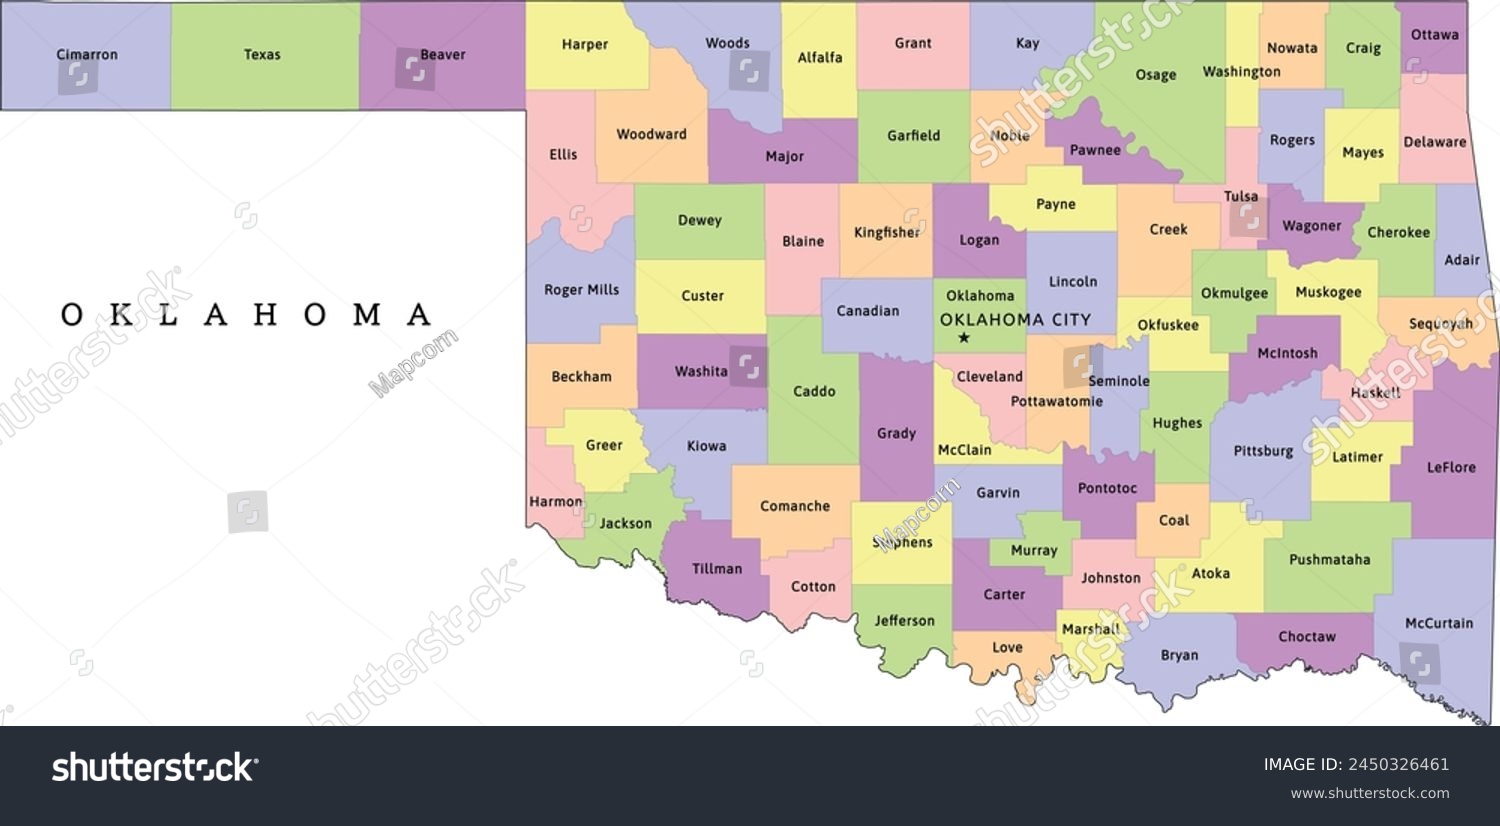 SVG of Oklahoma state administrative map with counties. Clored. Vectored. Bright colors svg